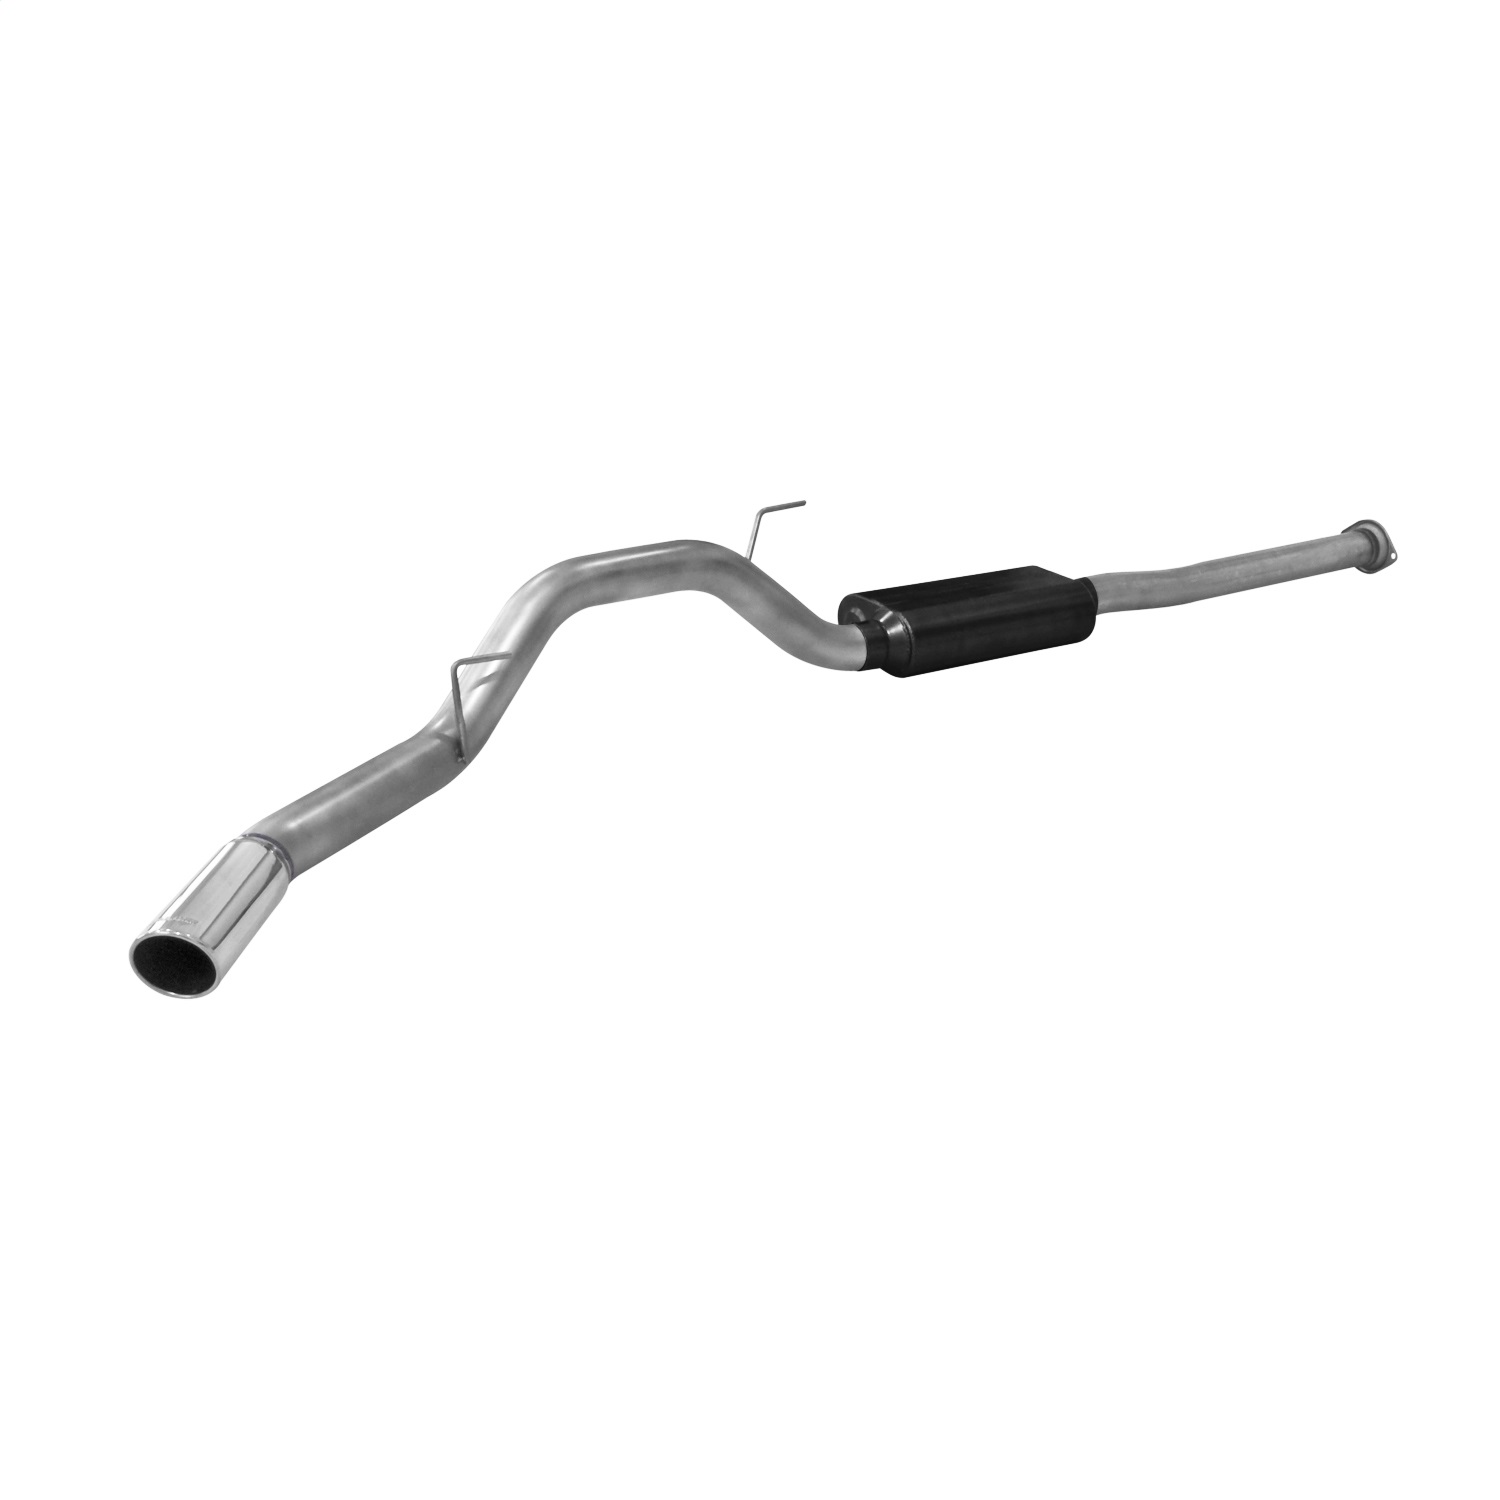 Flowmaster Flowmaster 817551 American Thunder Cat Back Exhaust System Fits 10-14 F-150